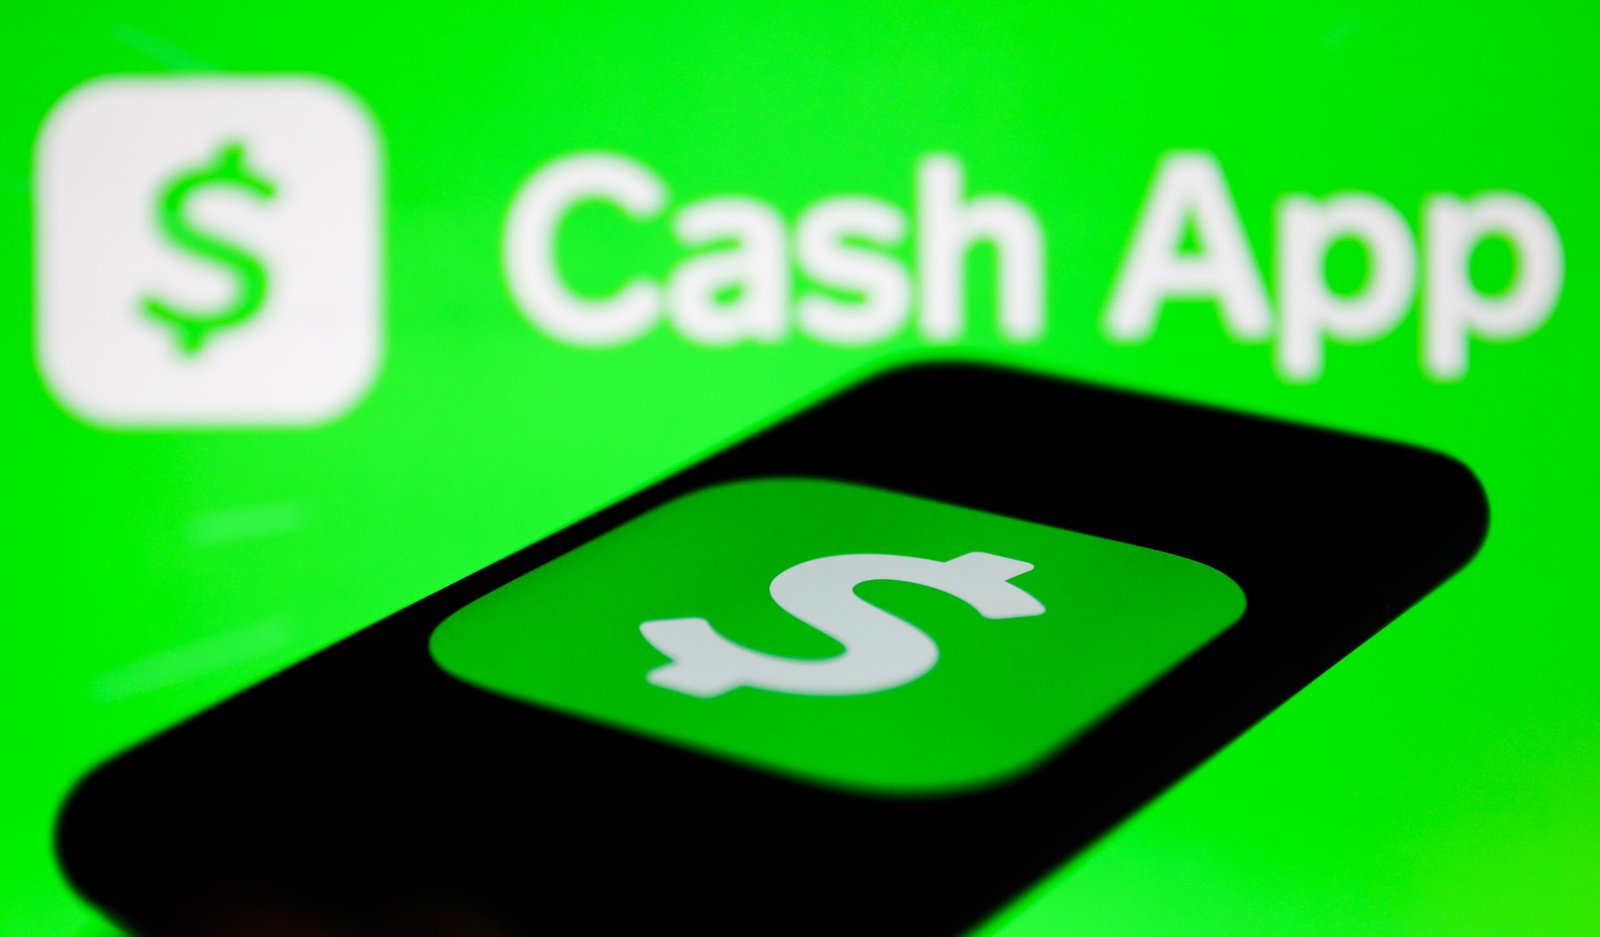 Money App breach impacted over 8 million users